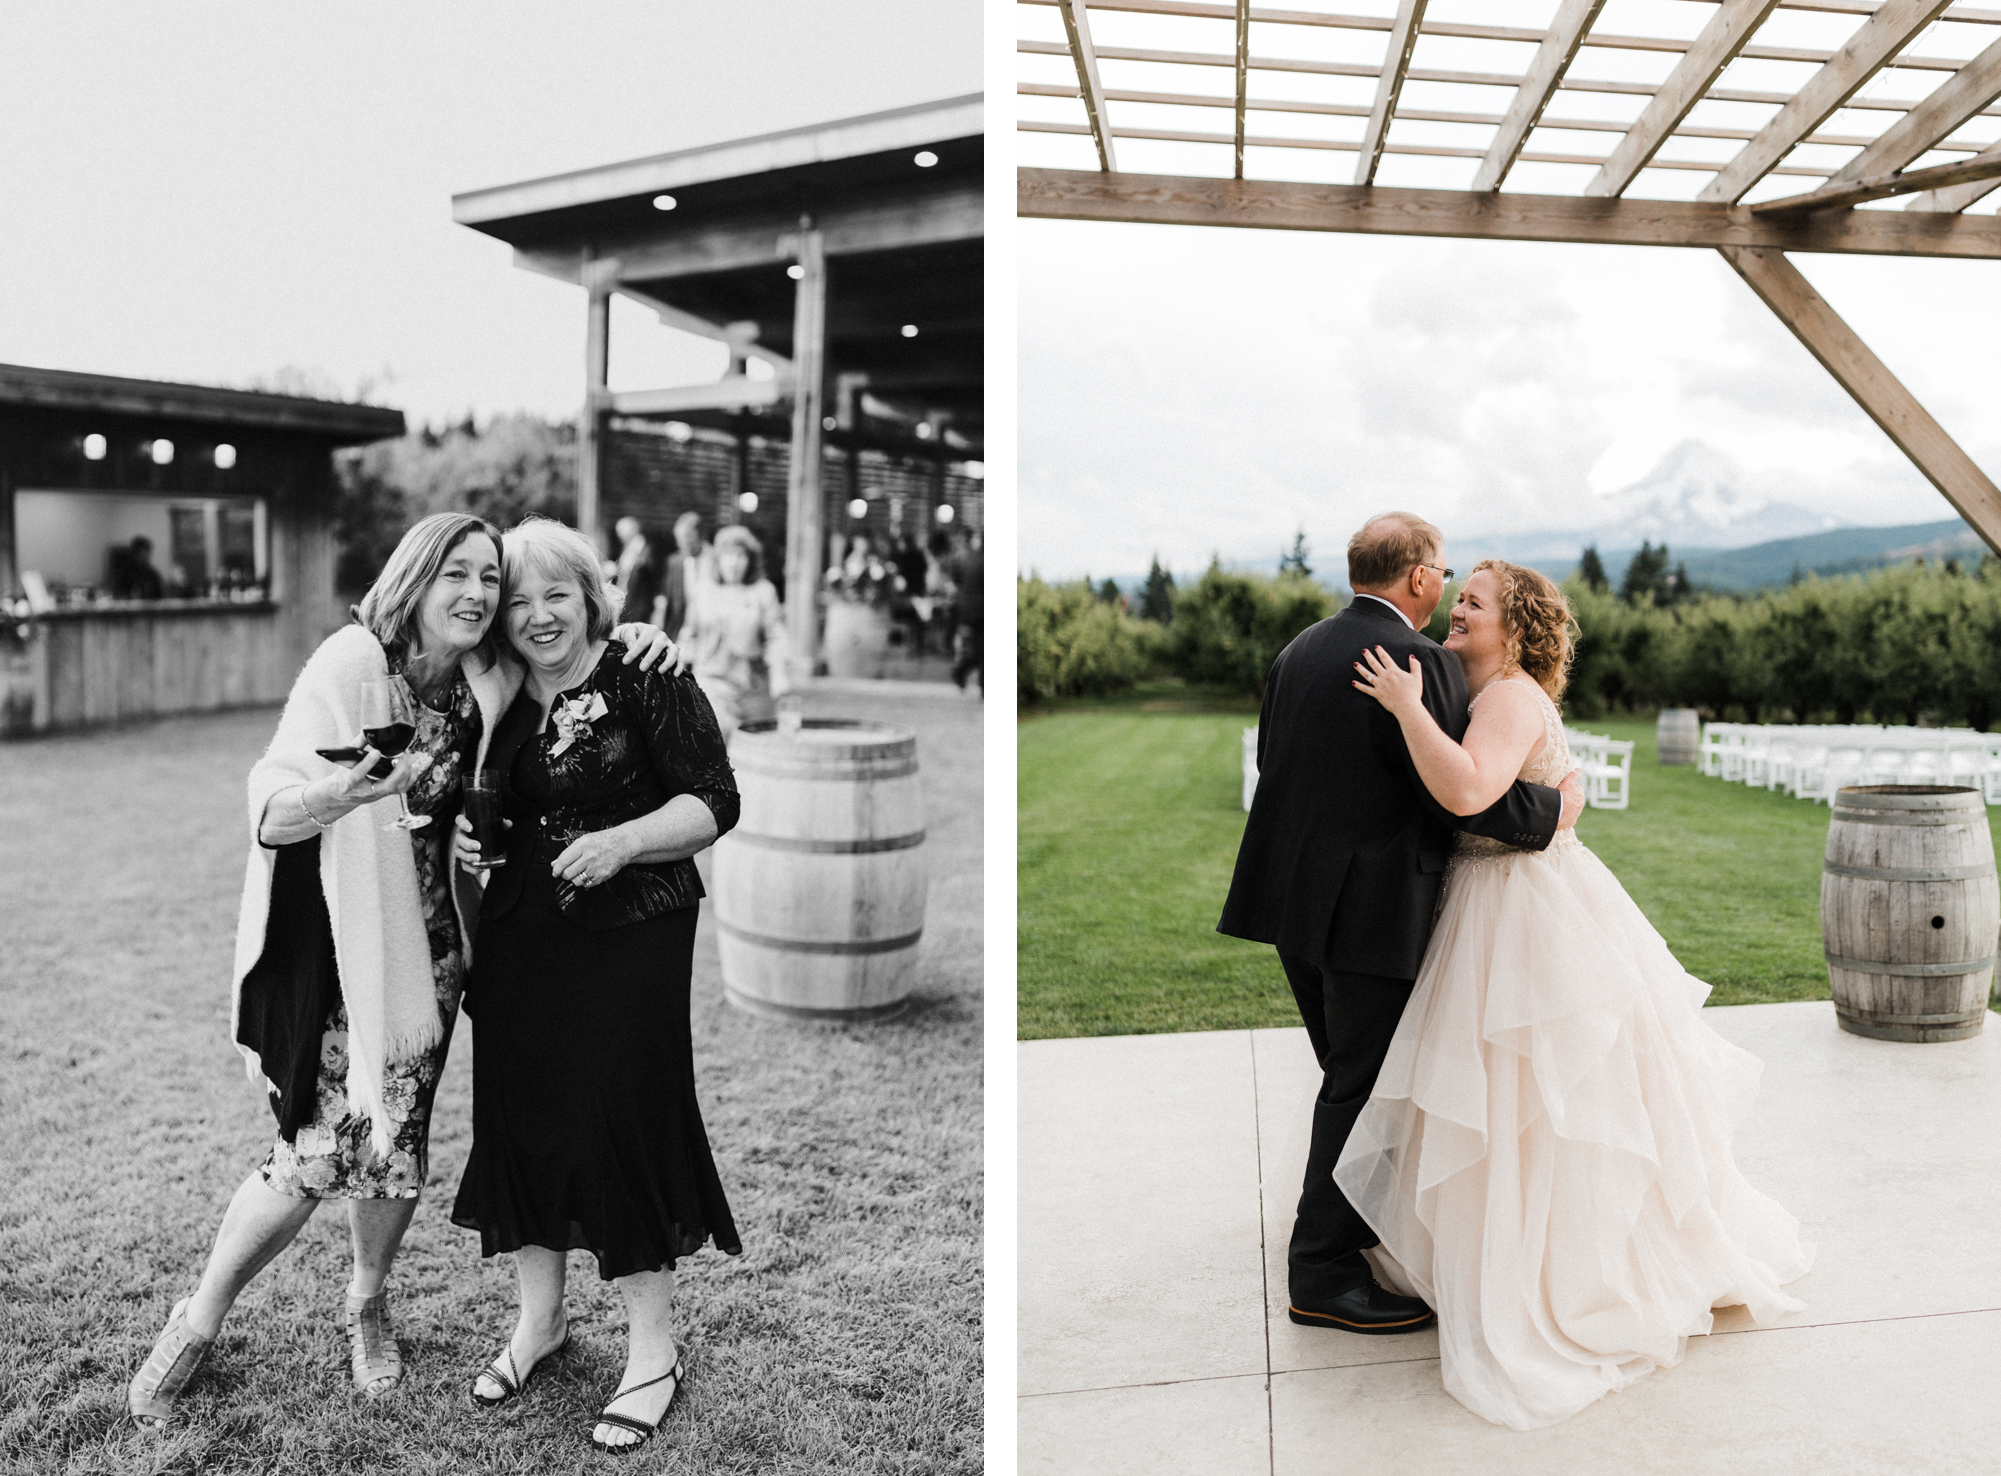 The photo on the right shows bride and father dancing. The photo on the left shows bride's mother and friend reacting.